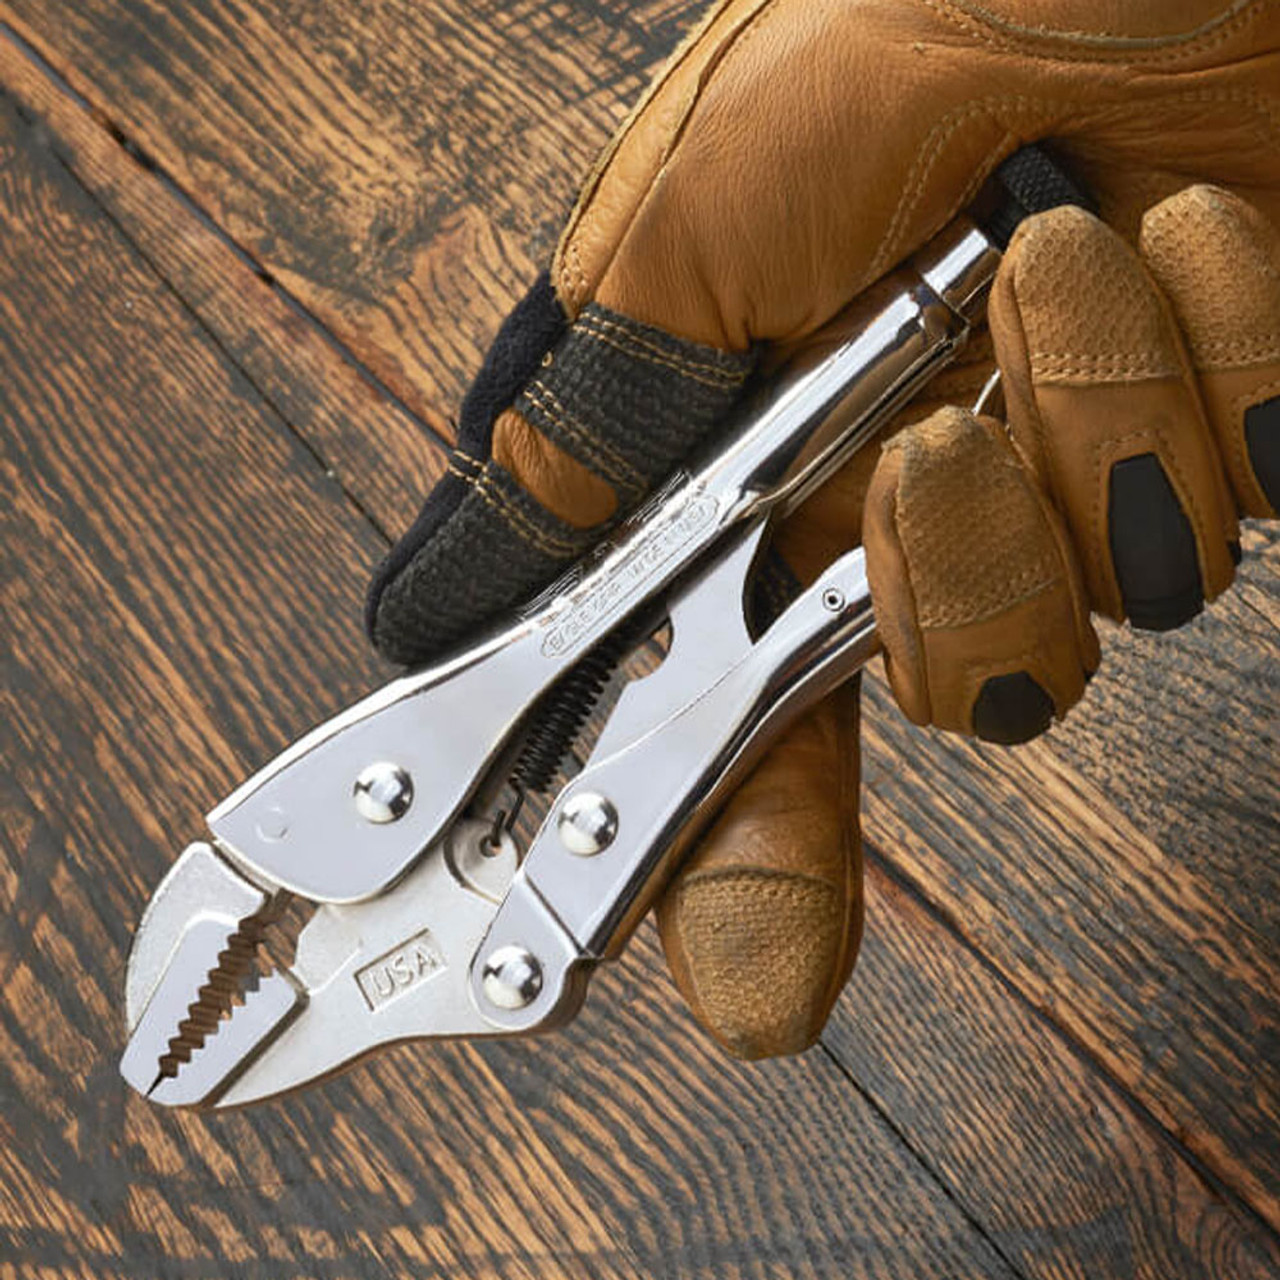 Pliers, Soft Jaw (Forged Steel)